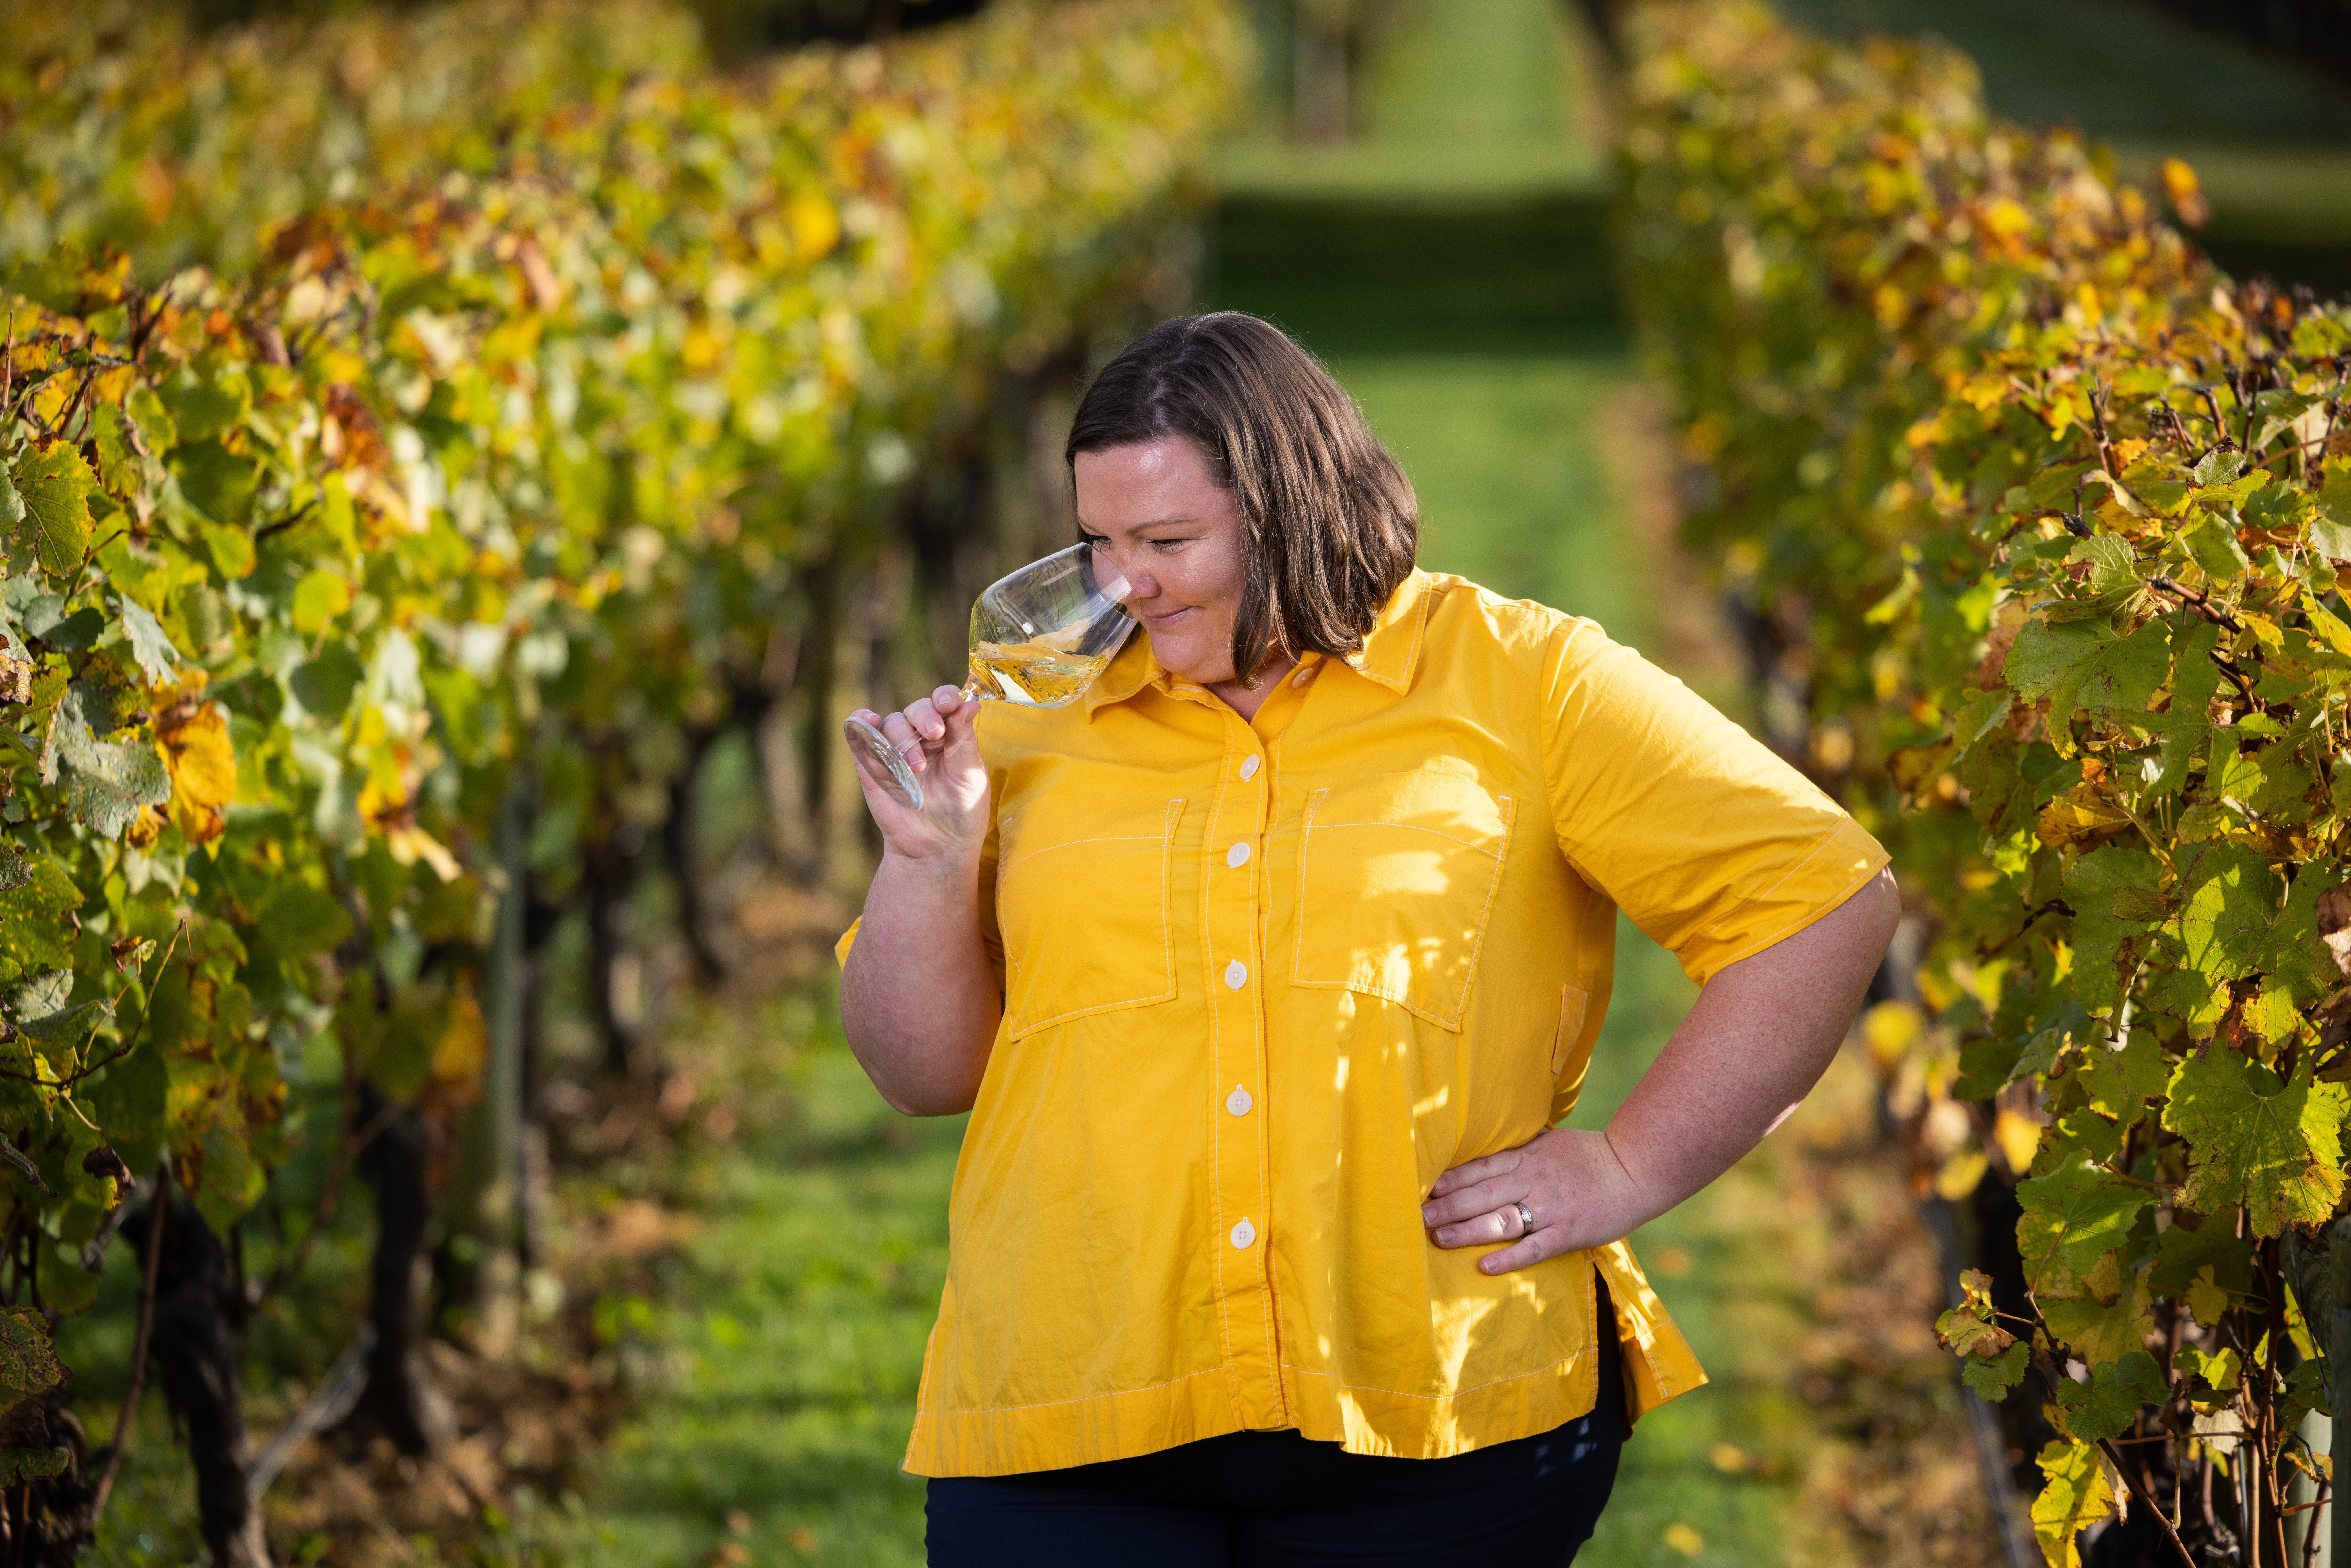 Hawke’s Bay – home to innovative winemakers for more than a hundred years